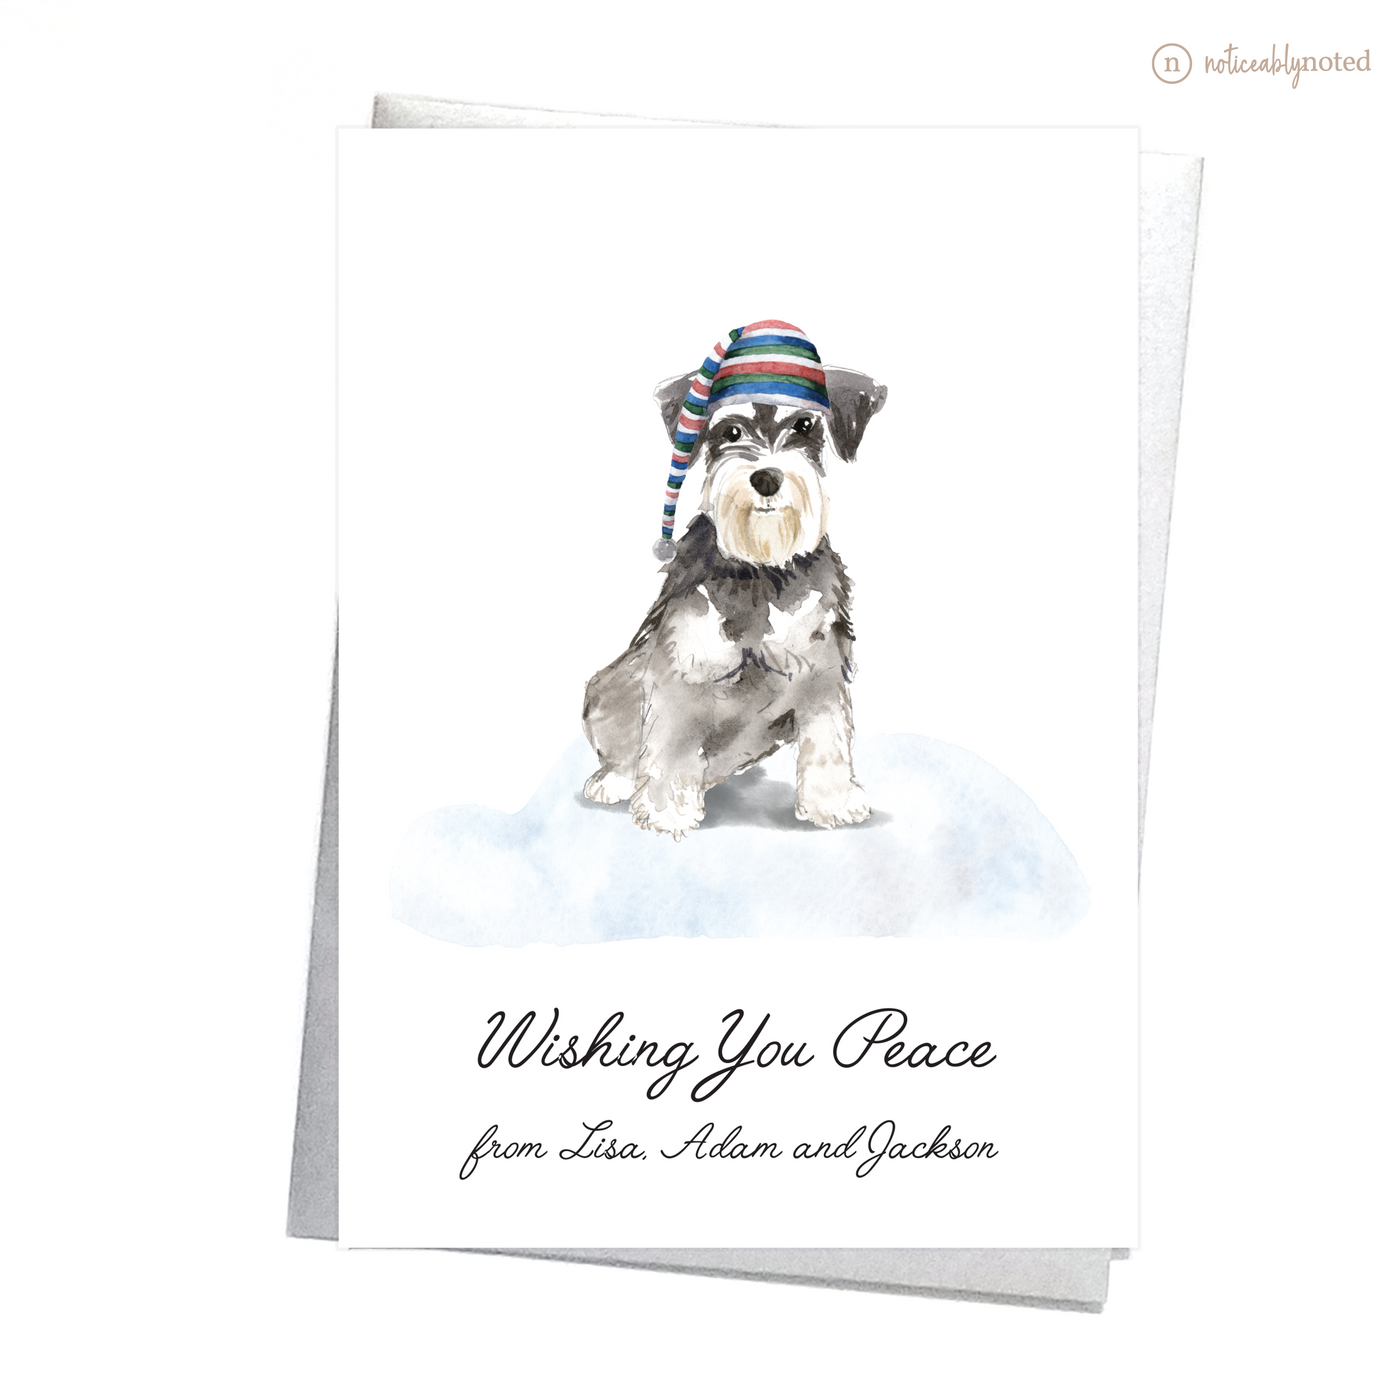 Miniature Schnauzer Dog Christmas Card | Noticeably Noted